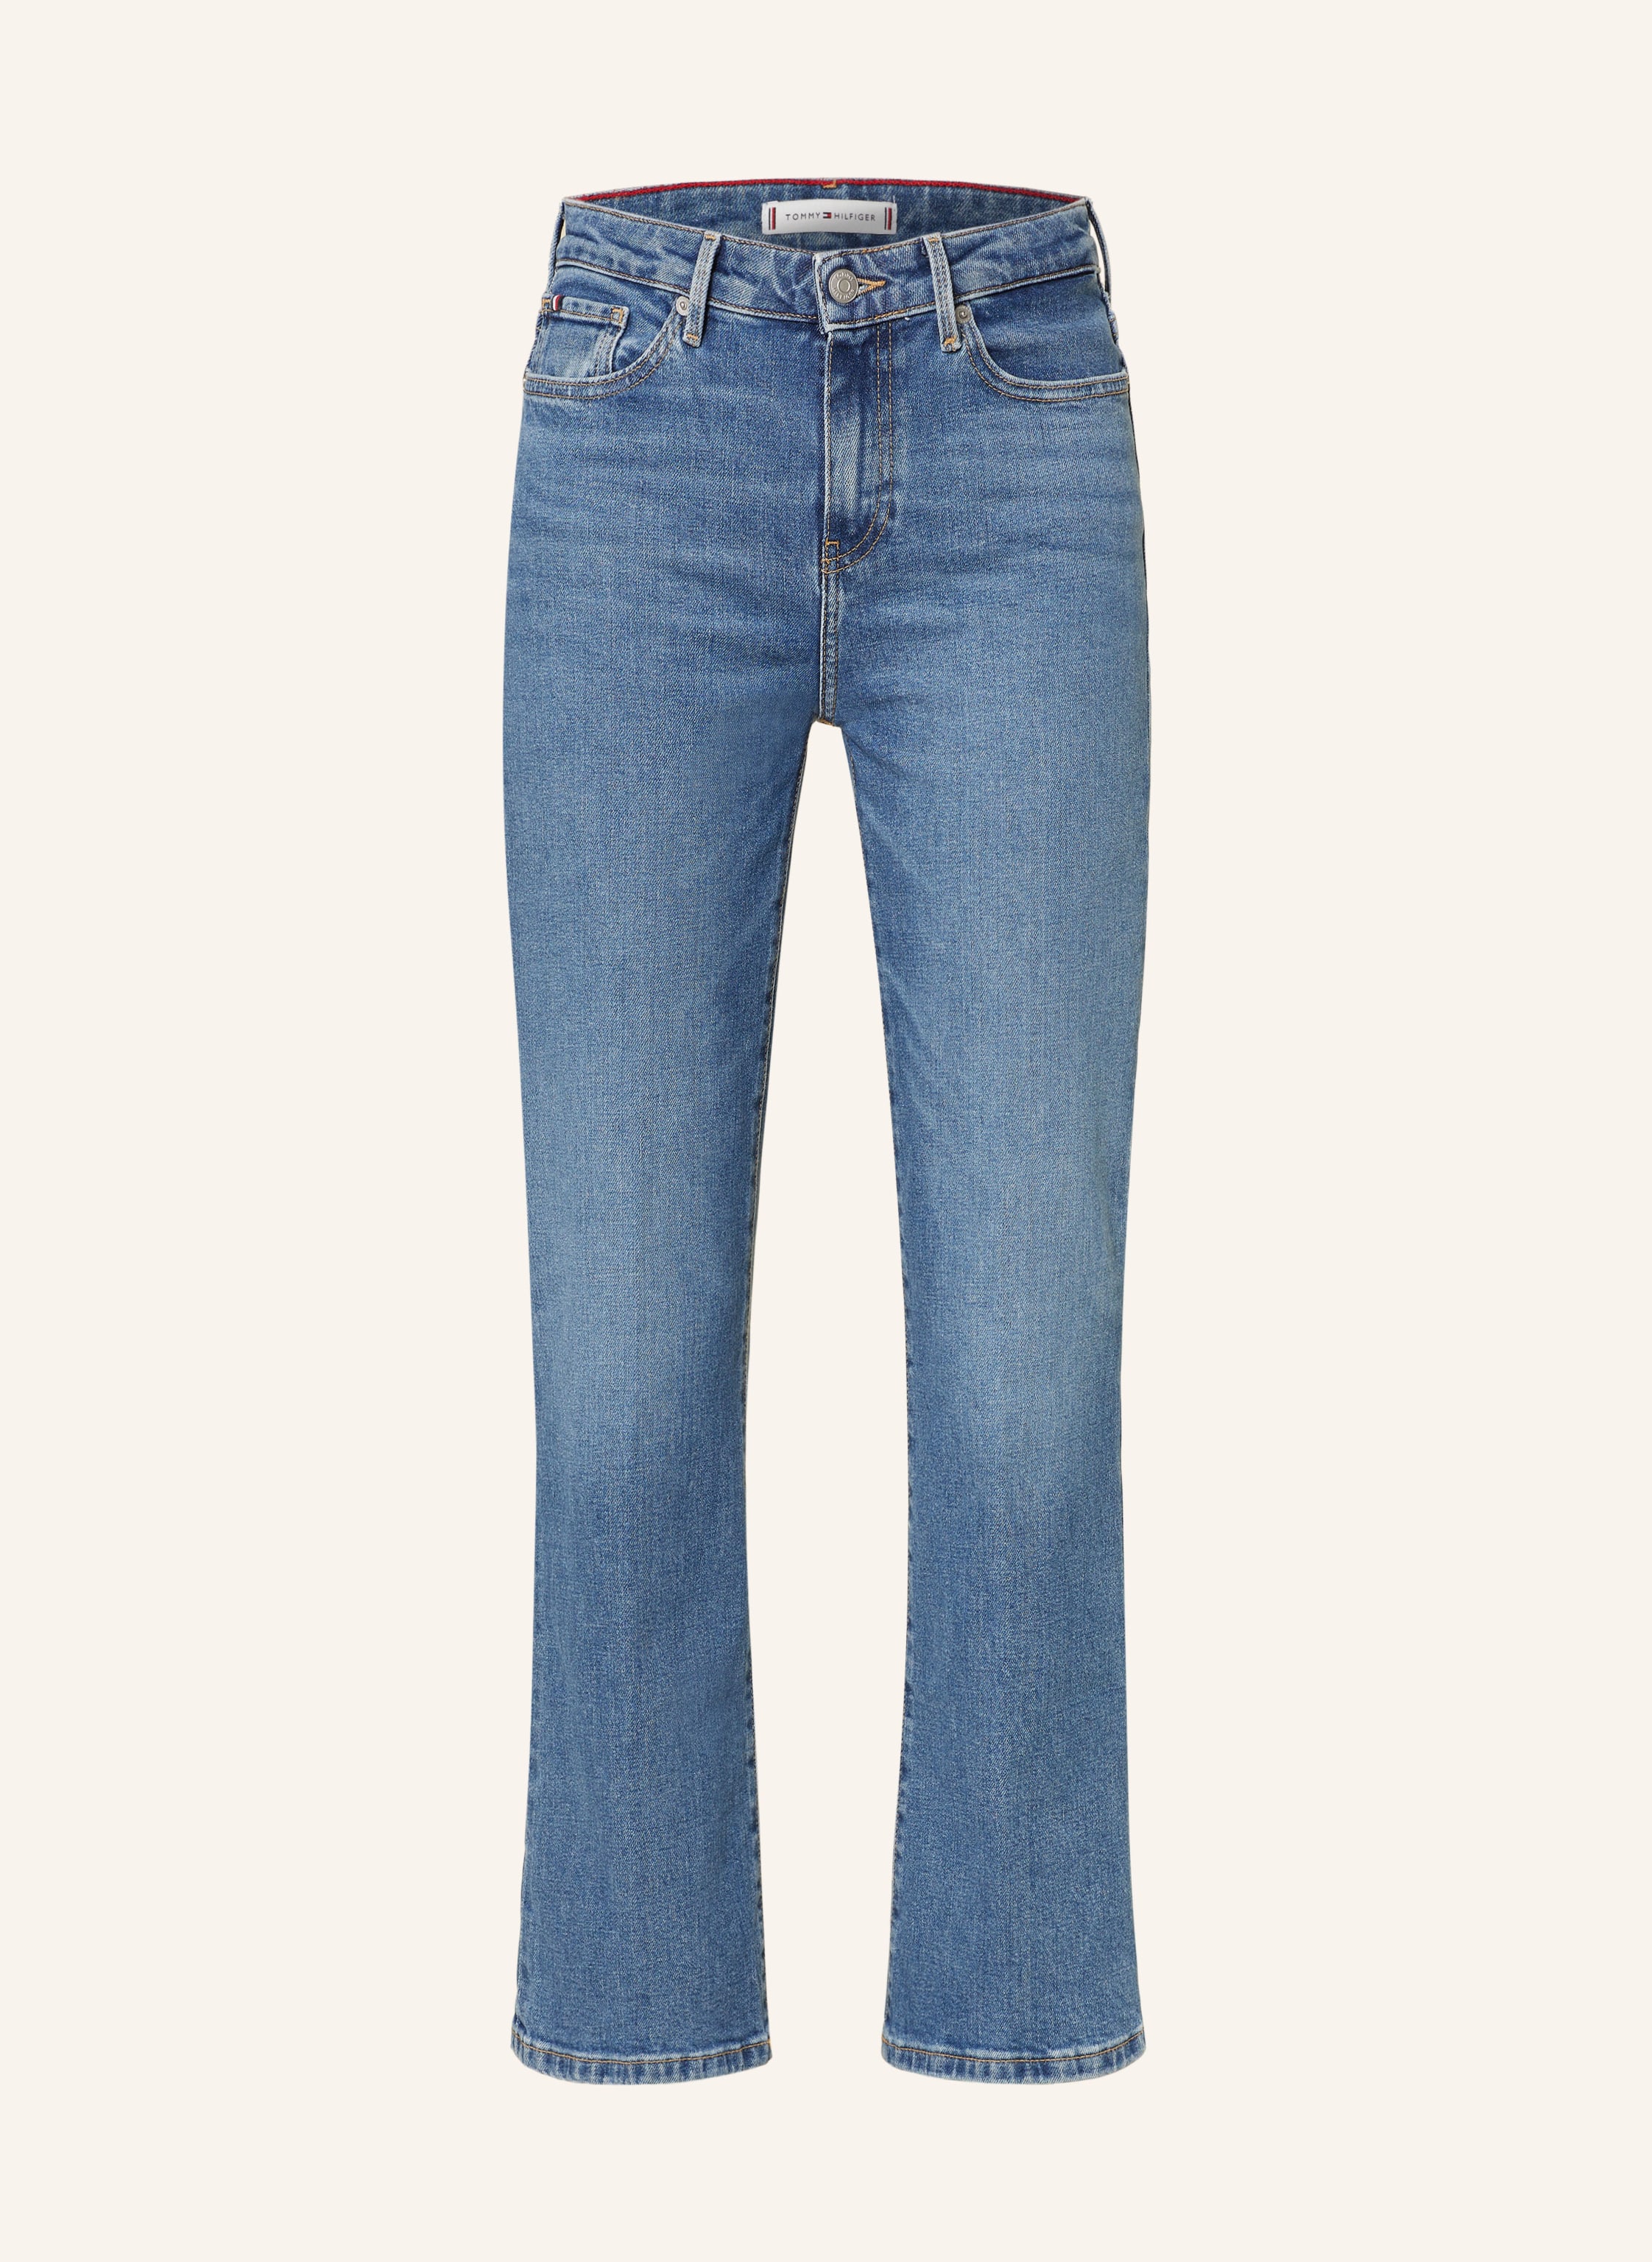 TOMMY HILFIGER Bootcut mel Jeans in 1a8